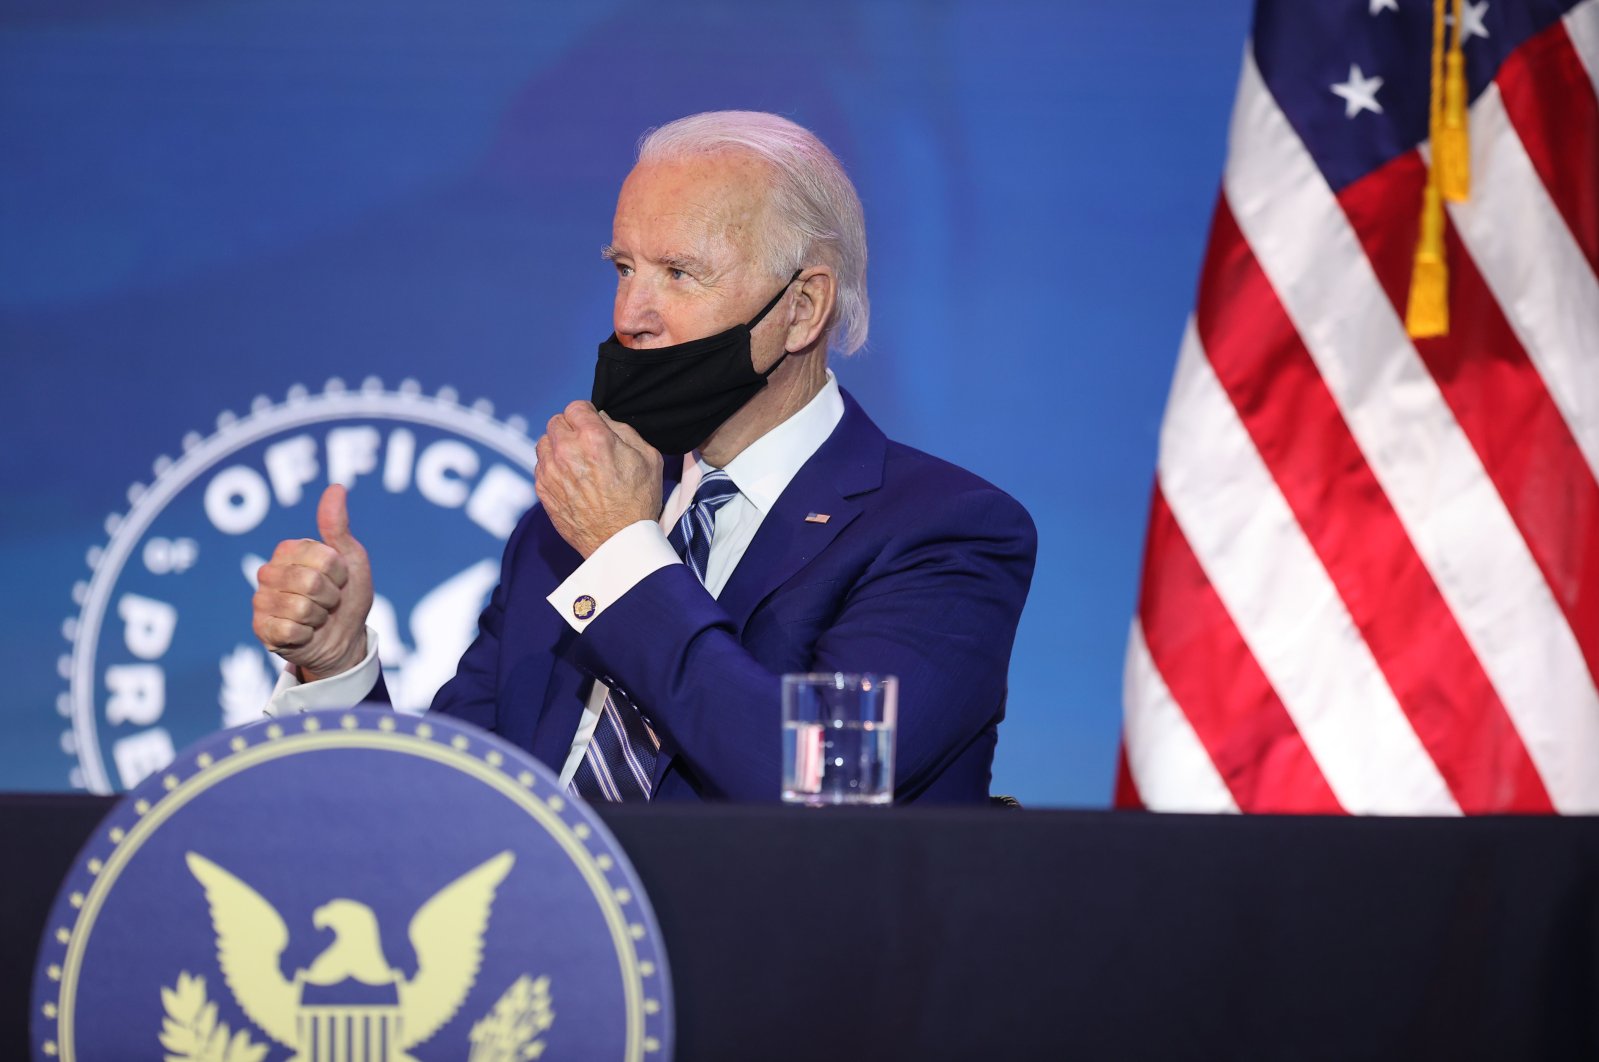 U.S. President-elect Joe Biden gives the thumbs-up as he adjusts his mask during a meeting in Wilmington, Delaware, the U.S., Dec. 9, 2020. (AFP Photo)